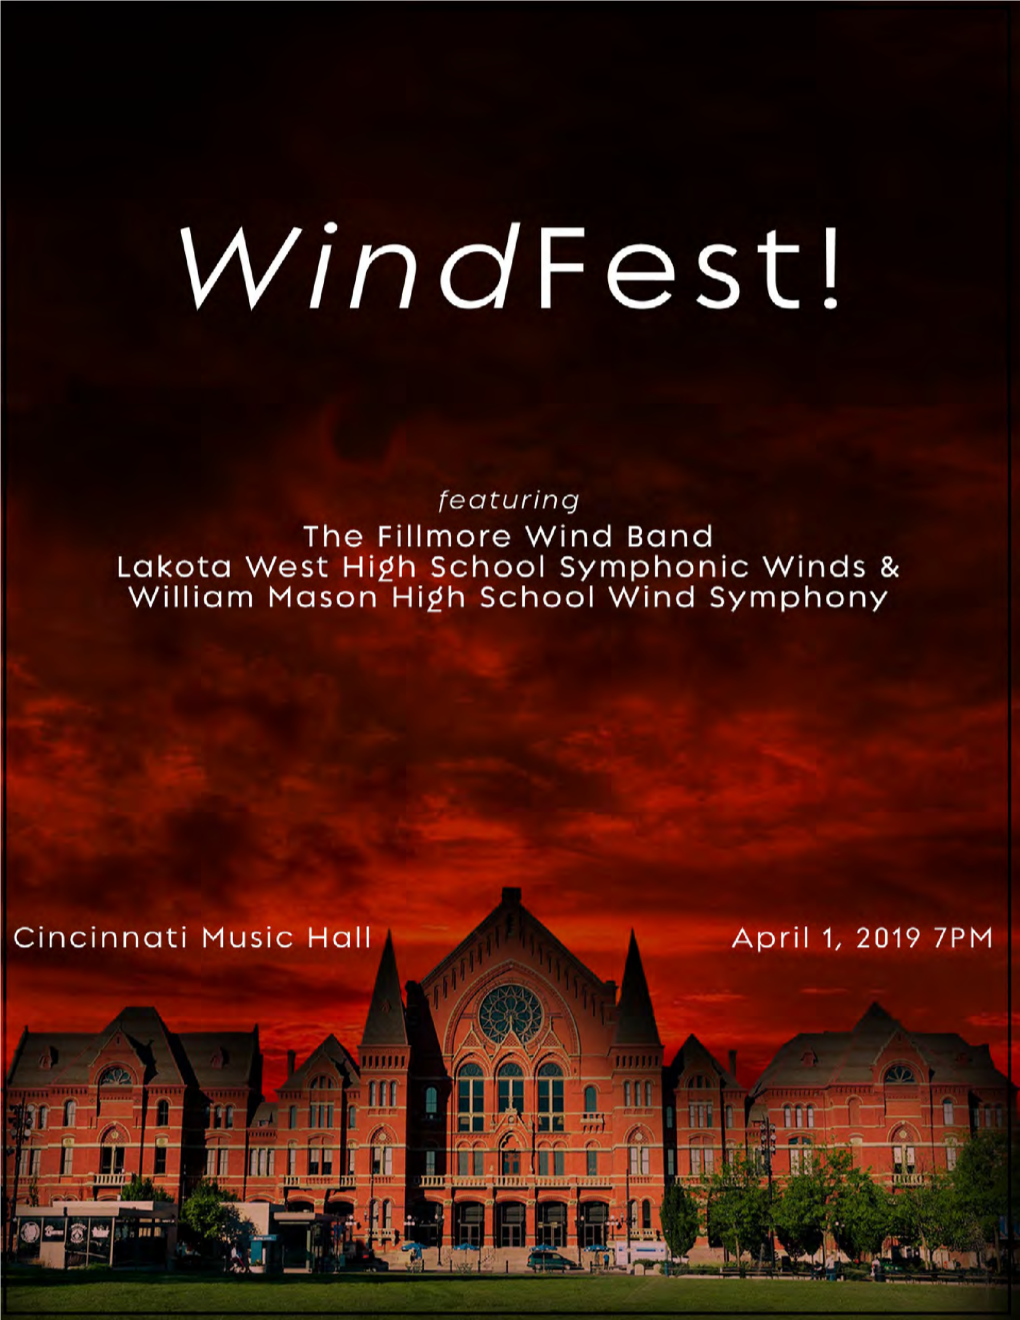 Windfest” at Cincinnati Music Hall, Which Invites the Area’S Premiere High School Programs to Perform Alongside the Fillmore Band in This Historic Venue